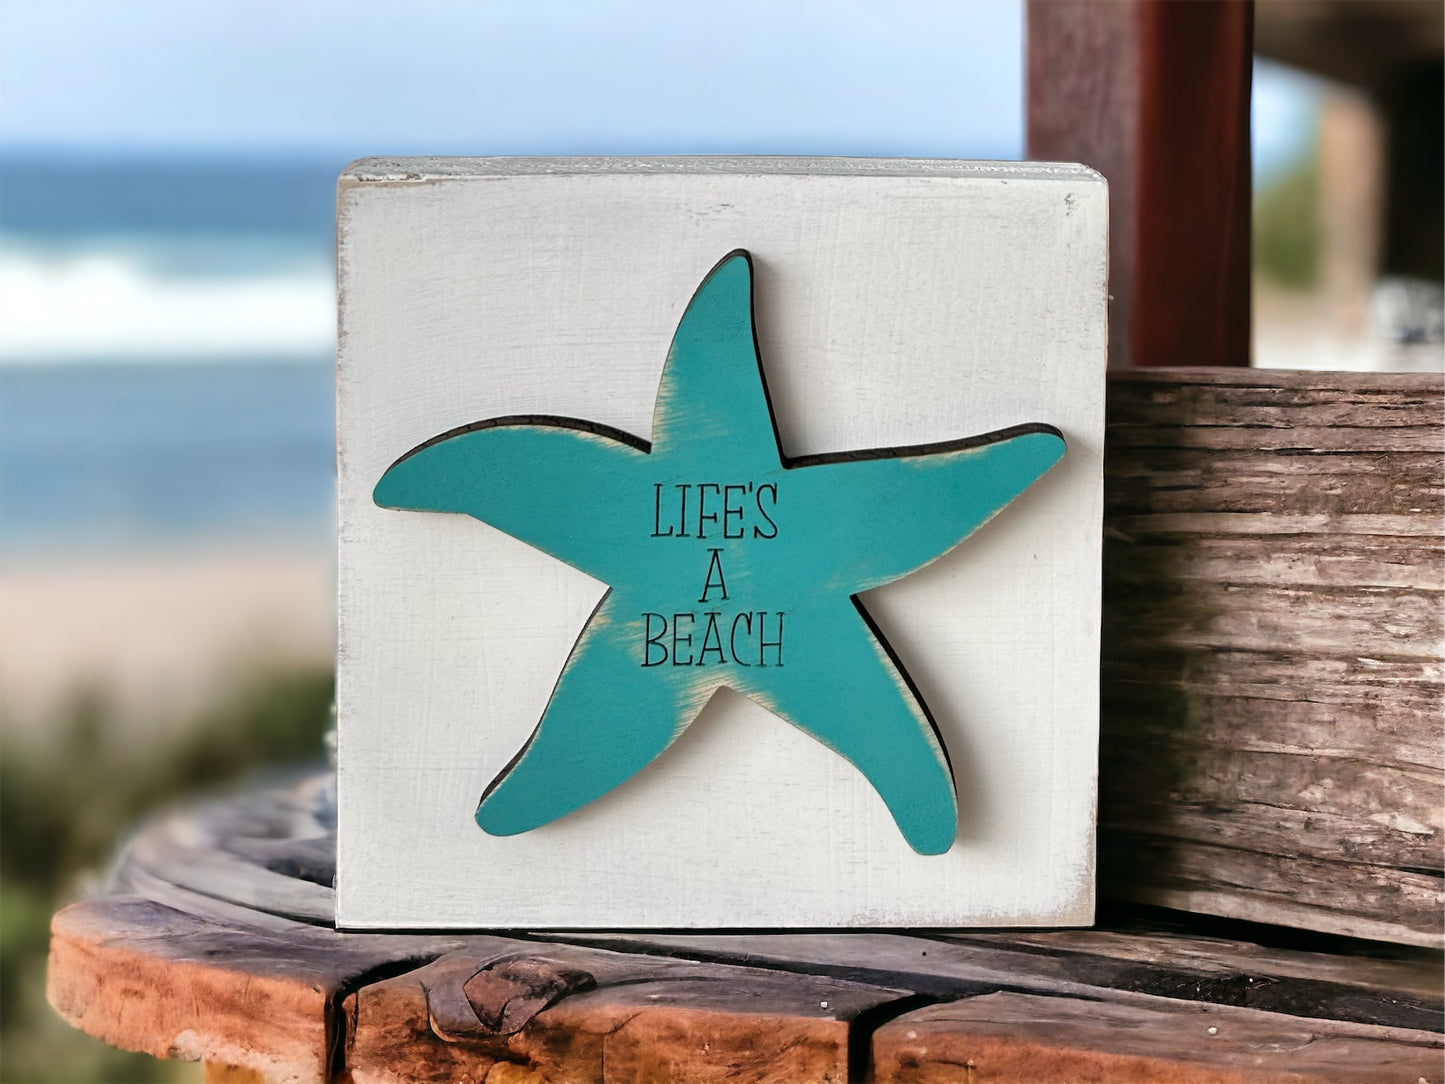 Starfish "Life’s a Beach" Engraved Wood Rustic Block Sign